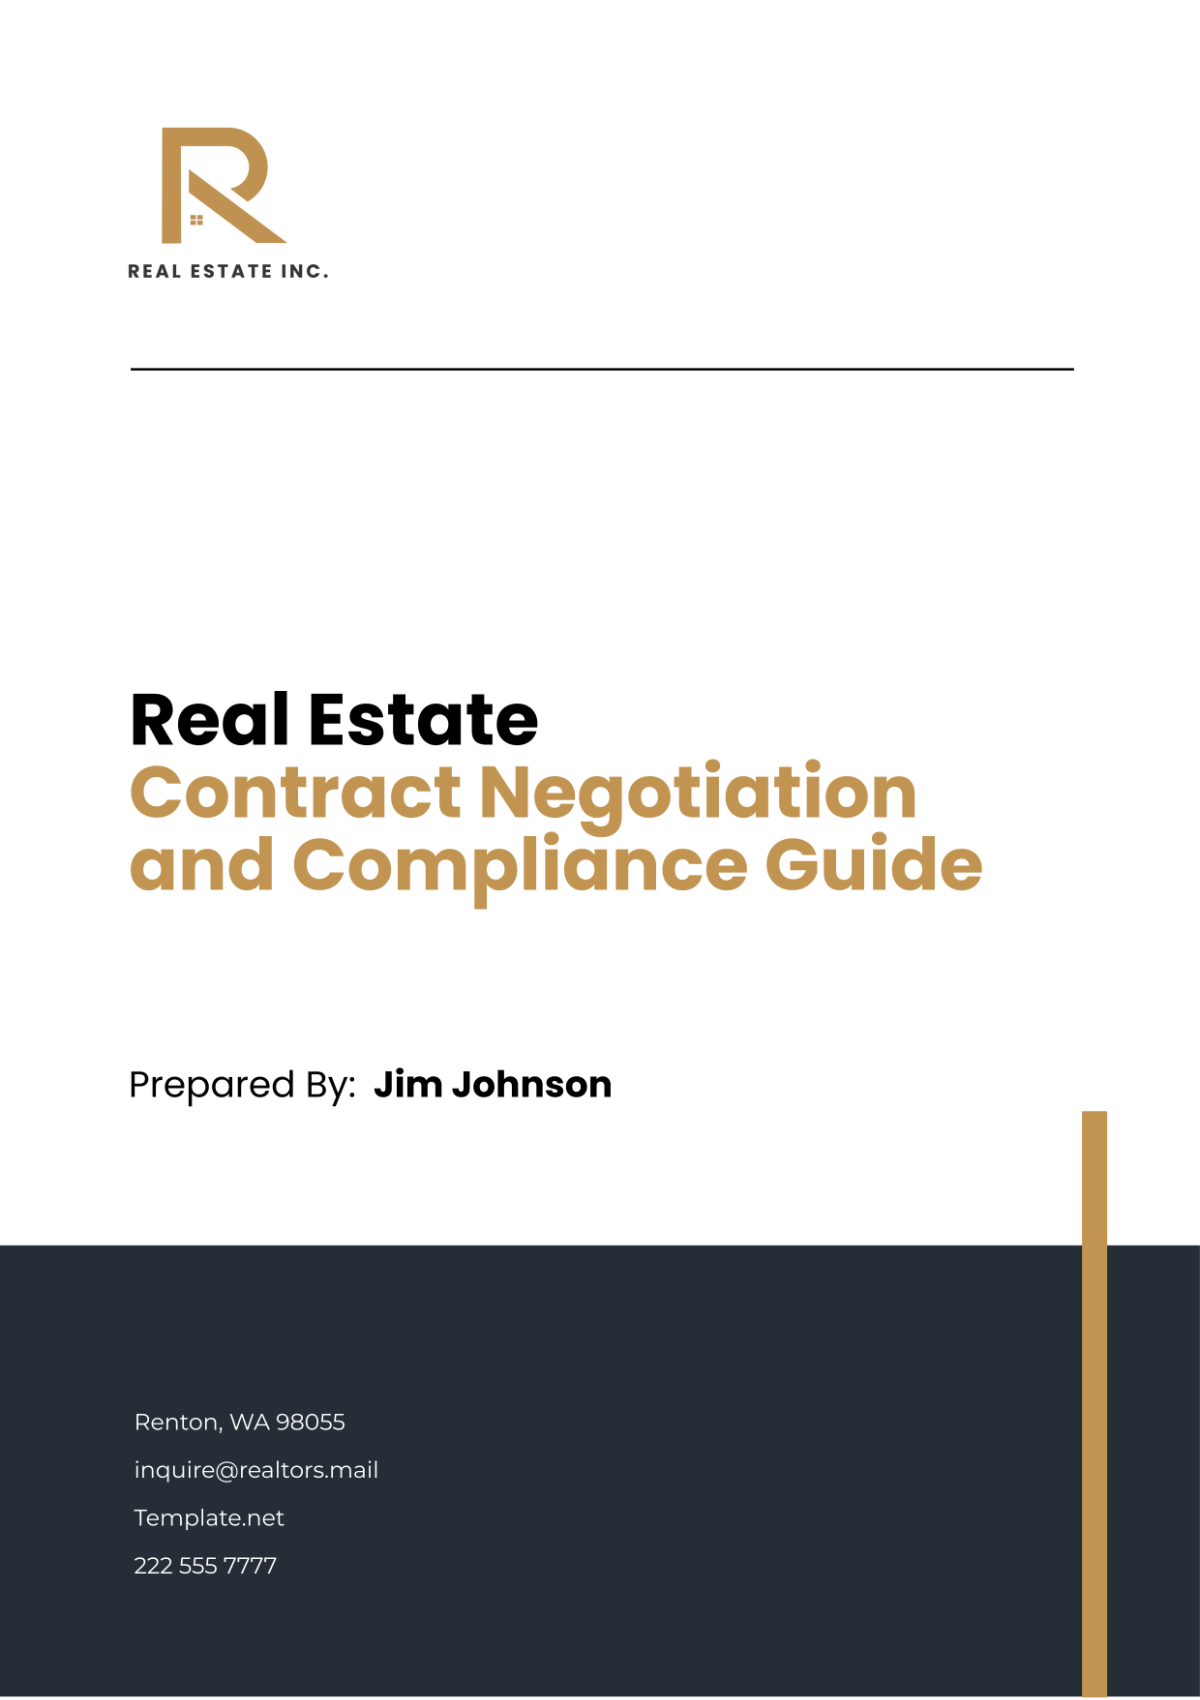 Real Estate Contract Negotiation and Compliance Guide Template